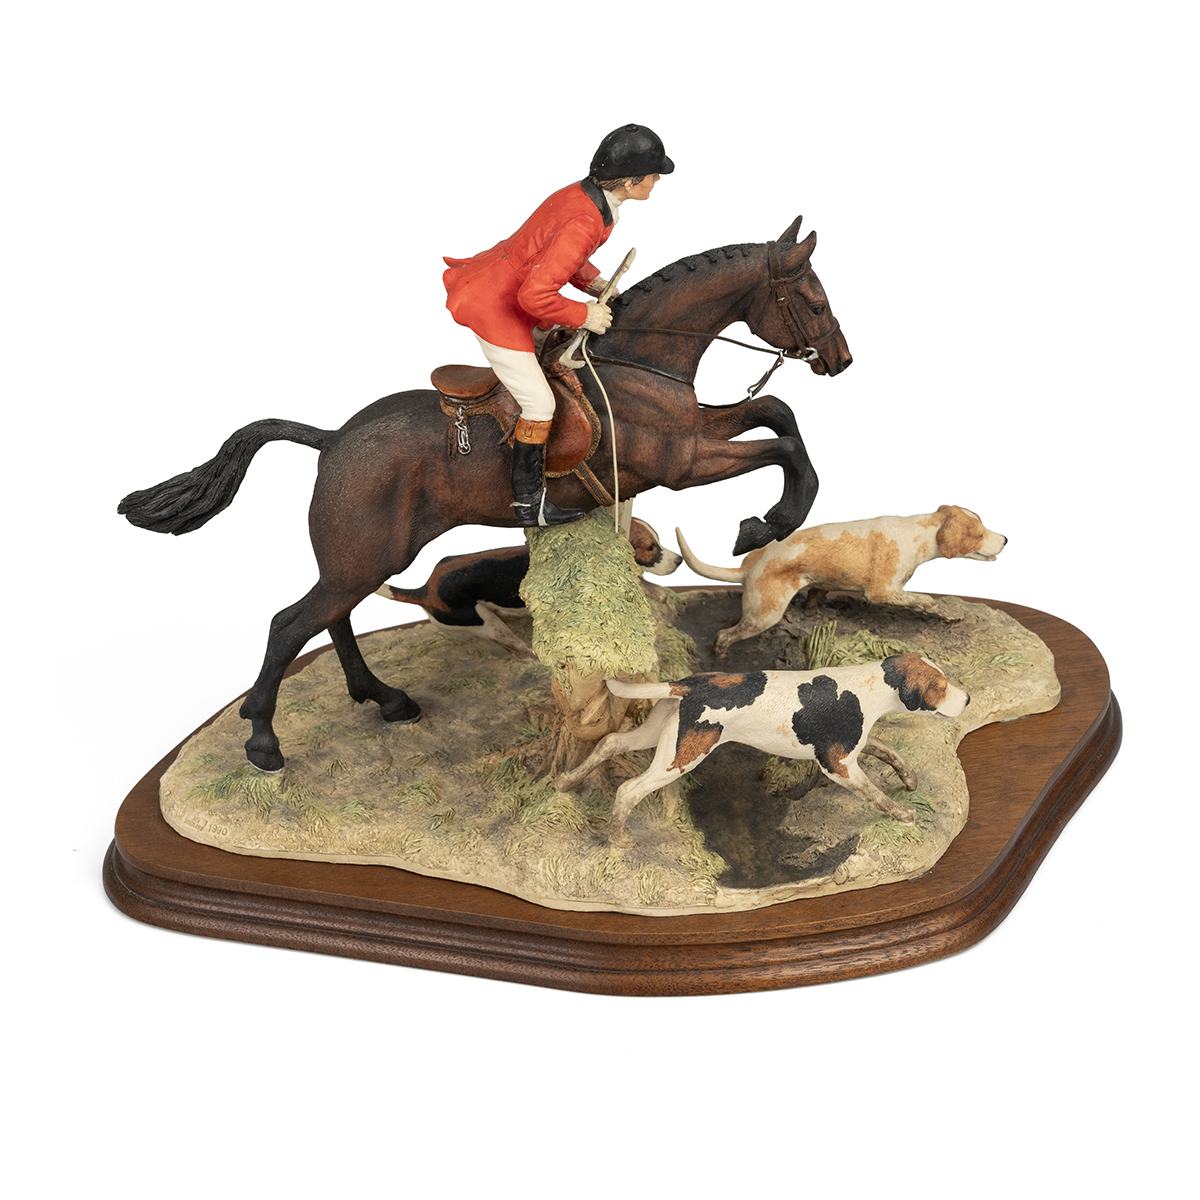 Border Fine Arts - "Hulloa Away" limited edition figurine (99/500) on wooden stand (H approximate... - Image 2 of 4